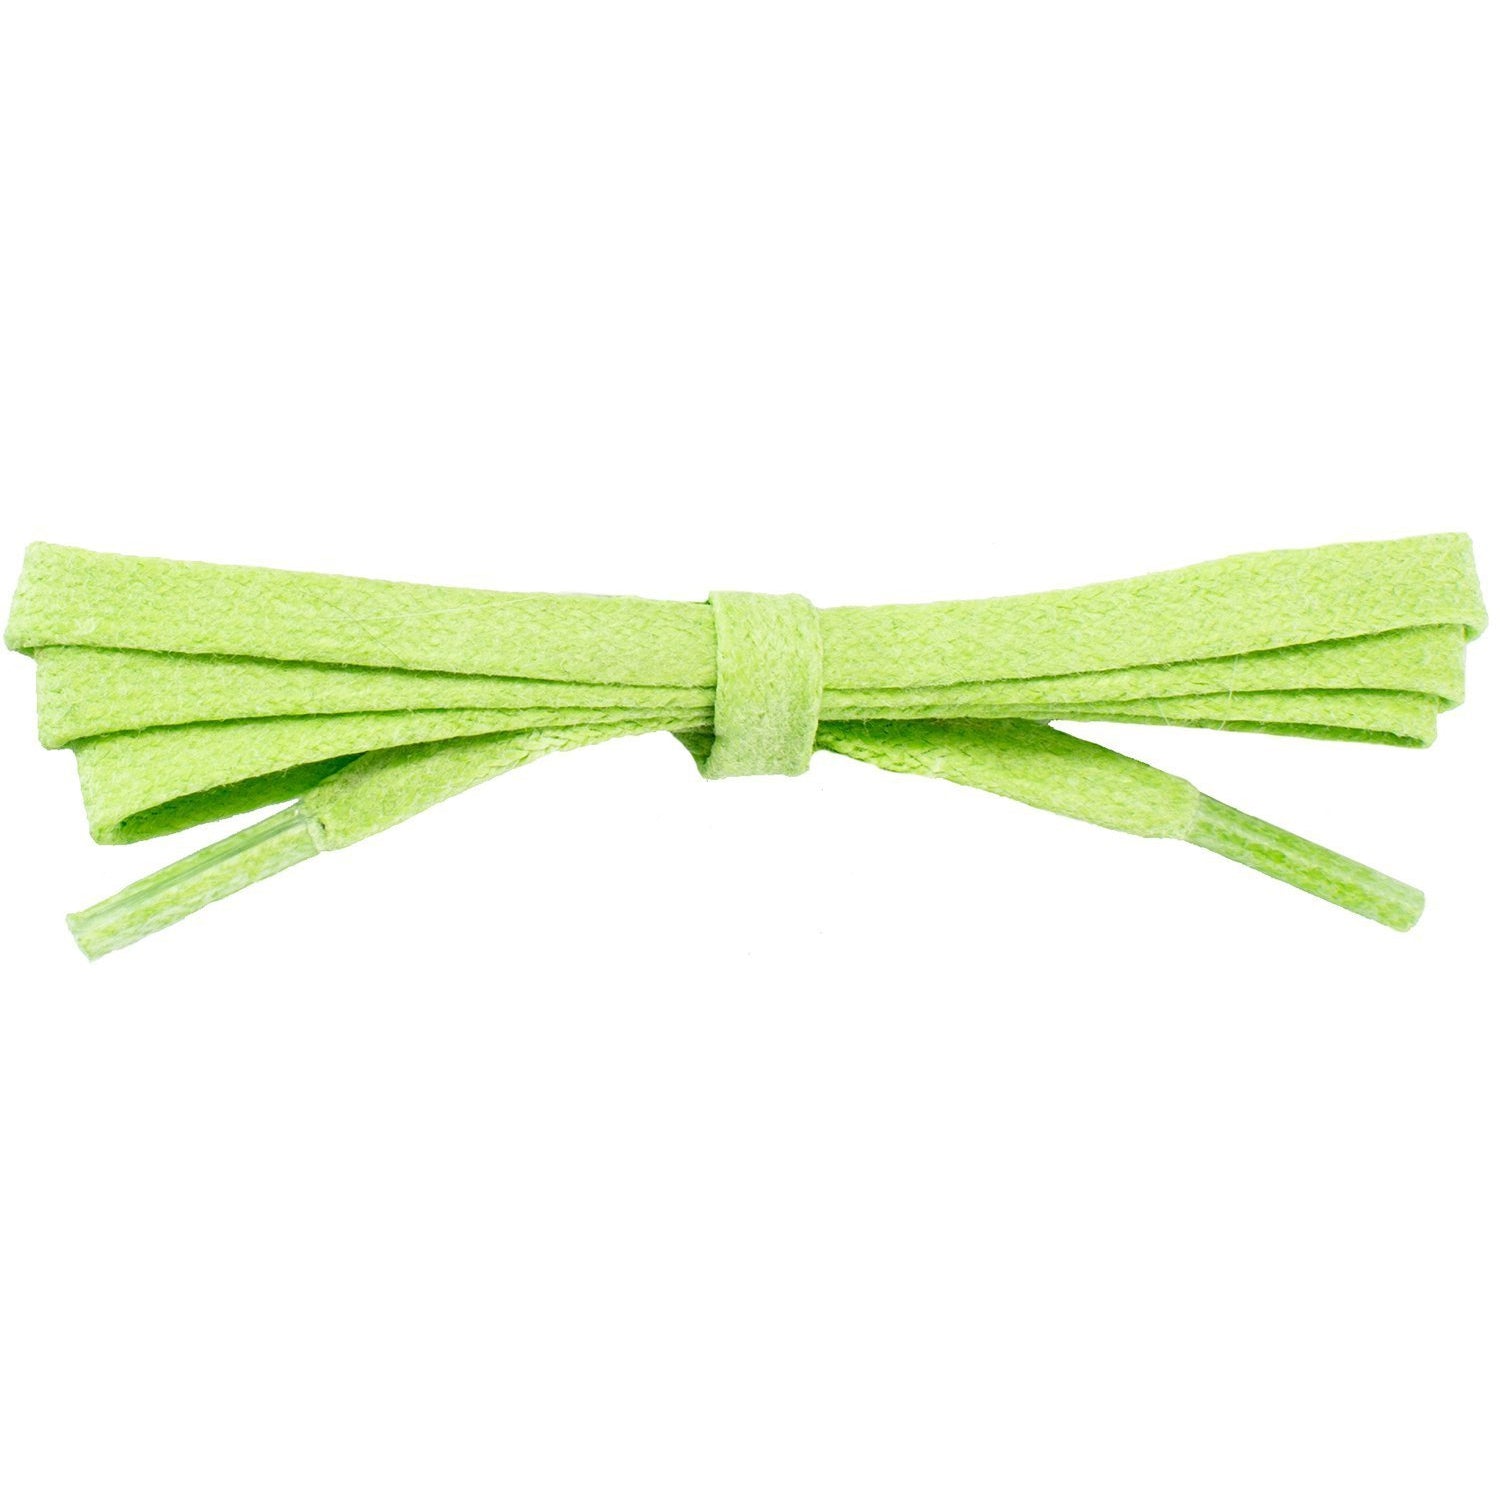 Wholesale Waxed Cotton Flat DRESS Laces 1/4'' - Lucky Lime (12 Pair Pack) Shoelaces